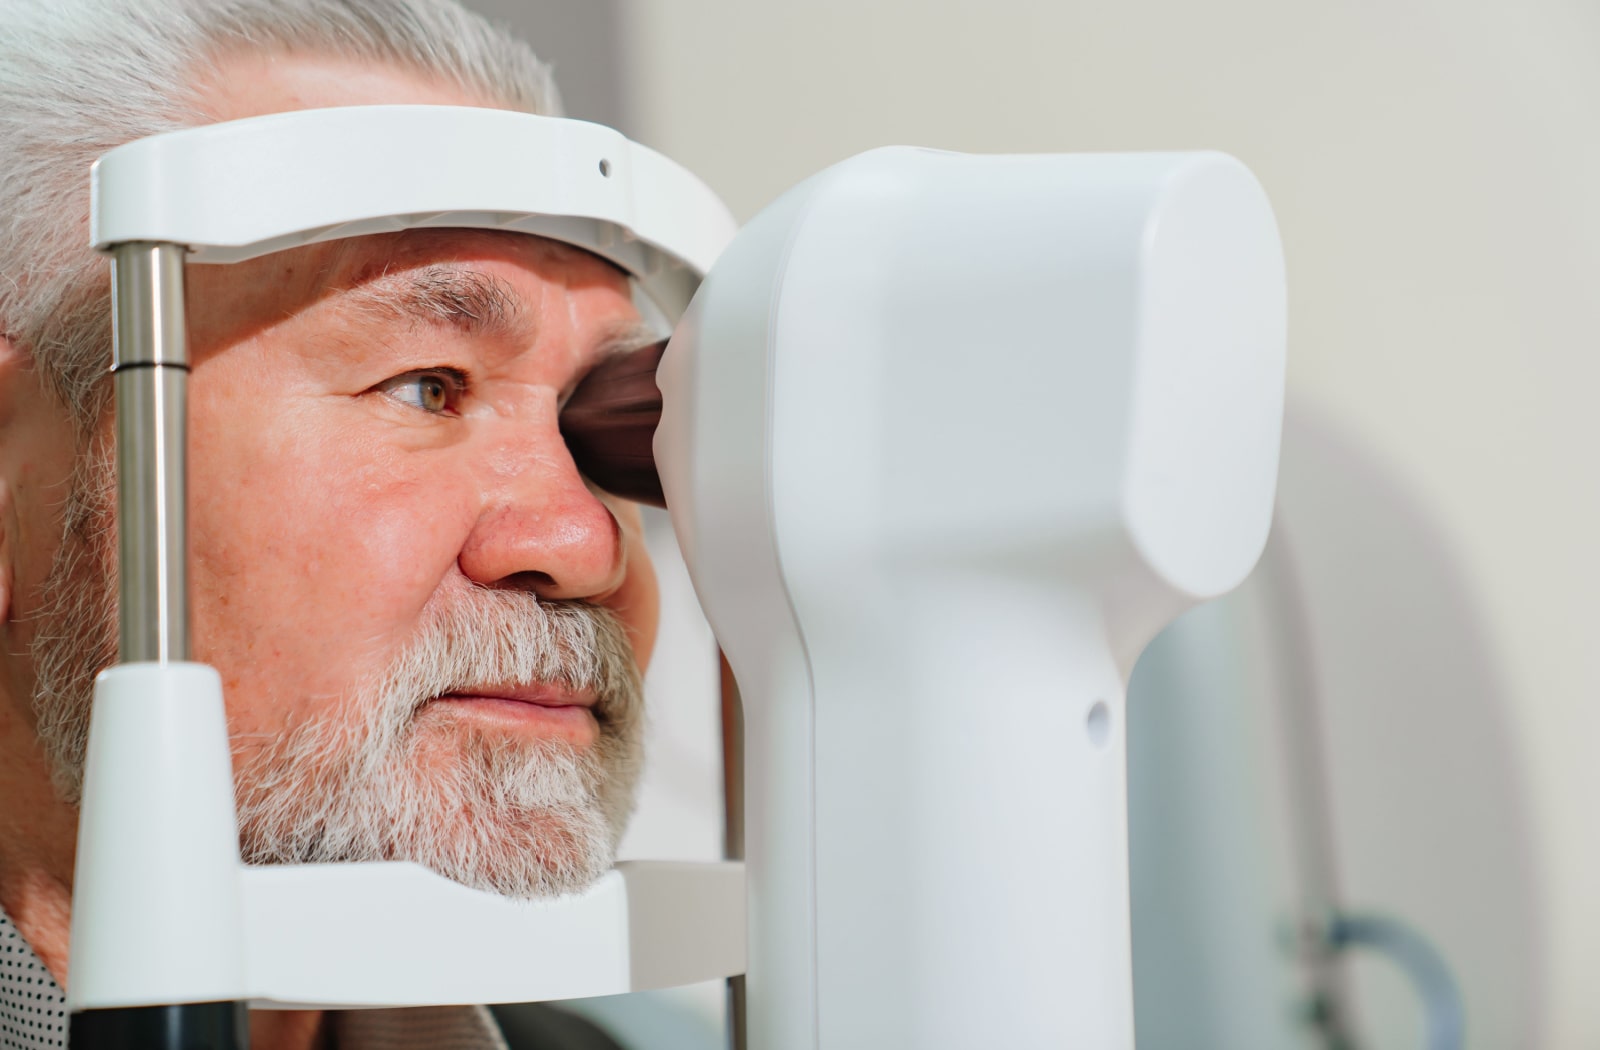 A senior man is undergoing a corneal topography exam. His left eye is placed in a device while his chin is resting in a chin support from the machine.